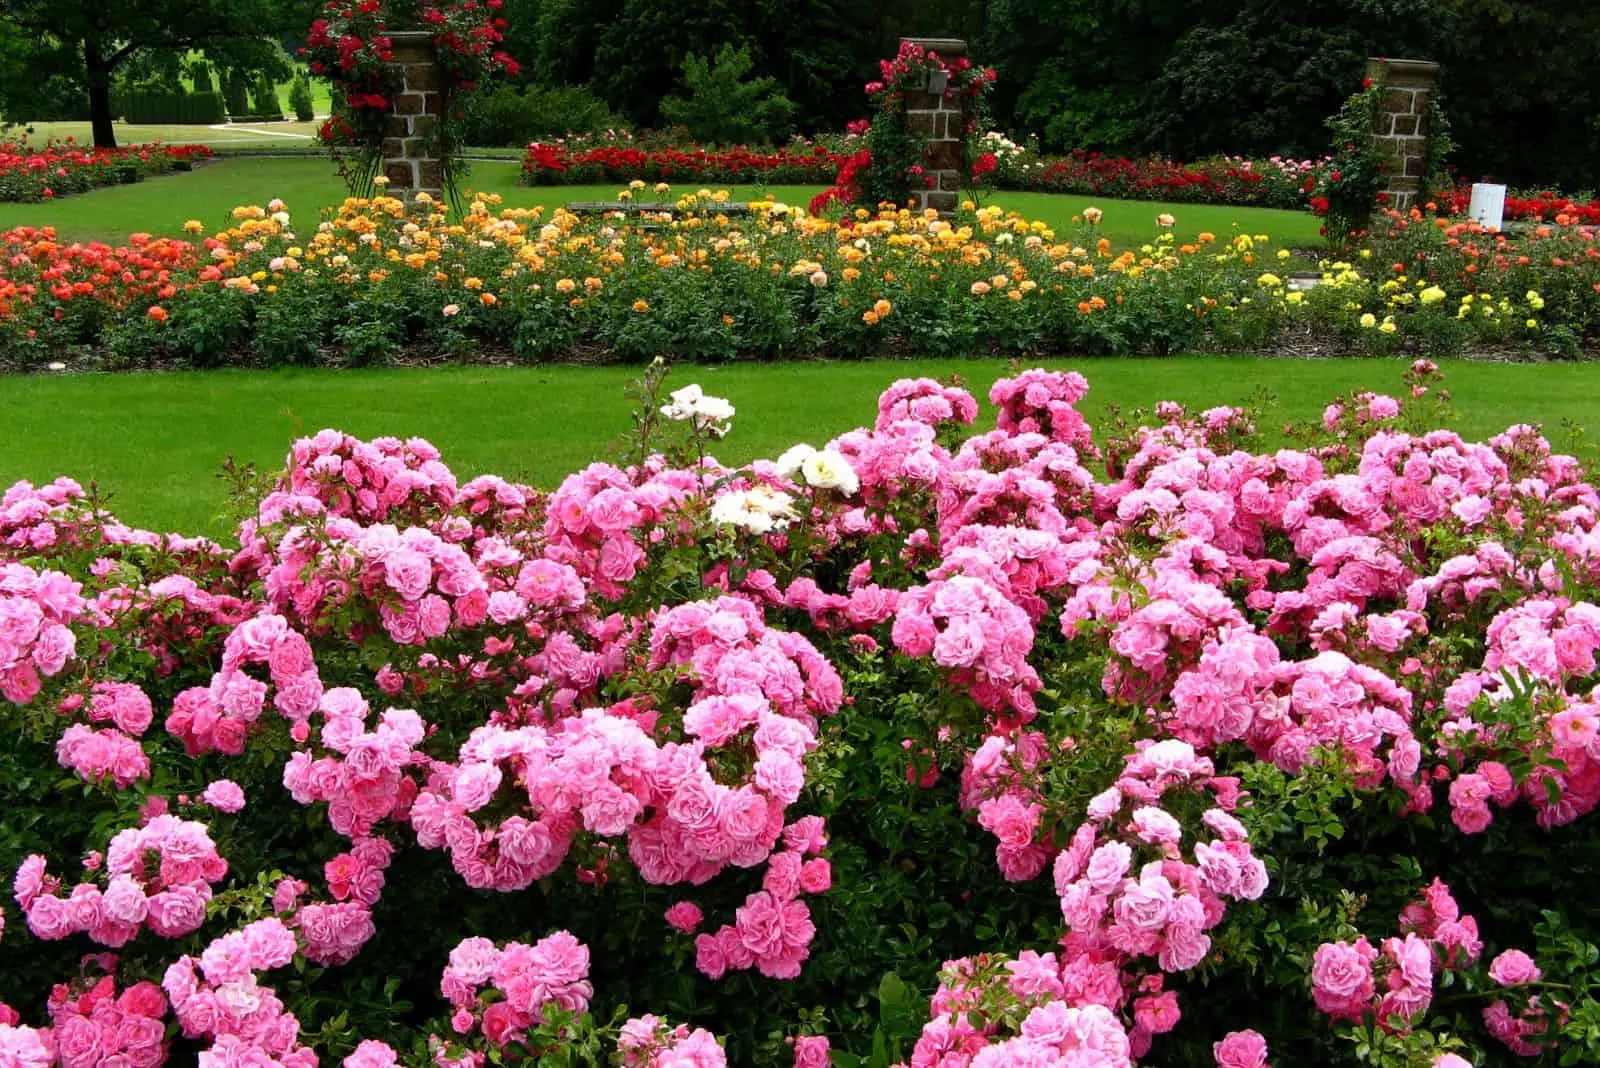 various types of roses in the garden